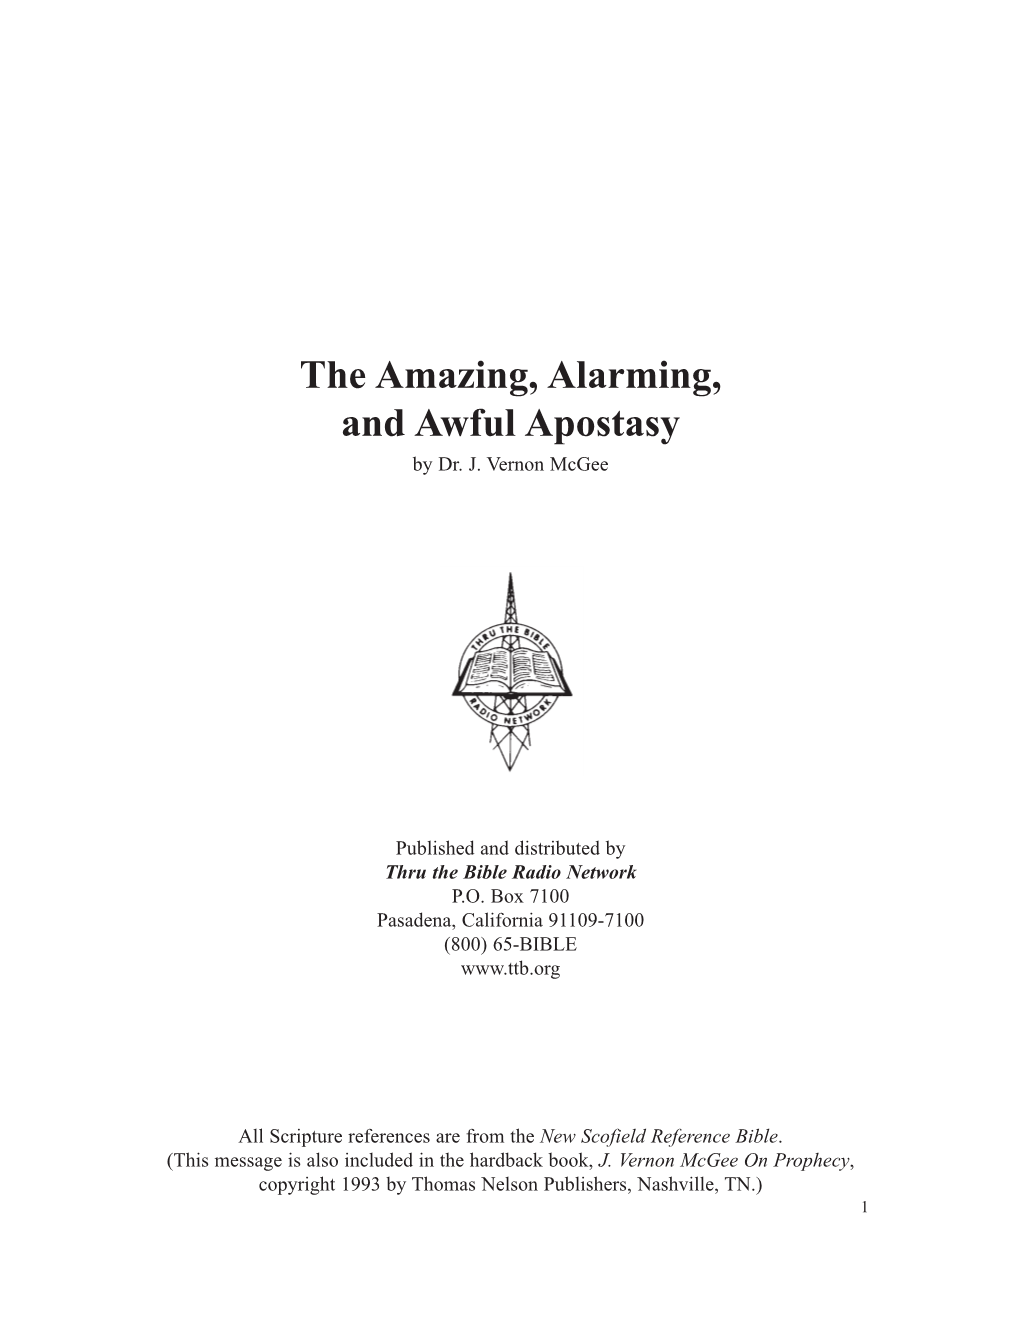 The Amazing, Alarming, and Awful Apostasy by Dr